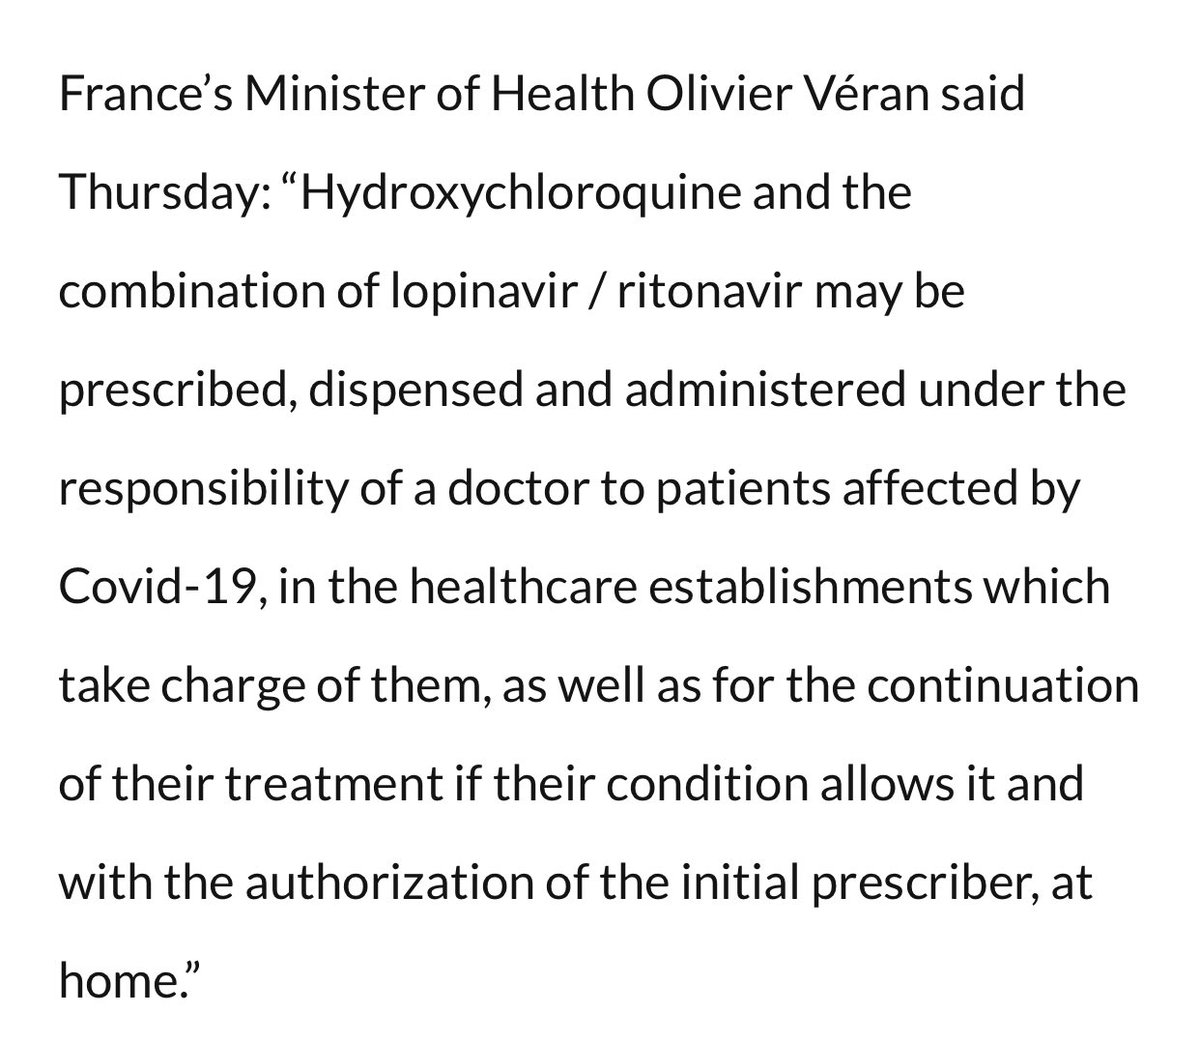 France Officially Sanctions Drug After 78 Of 80 Patients Recover From COVID-19 Within Five Days  #Hydroxycloroquine  https://www.dailywire.com/news/france-officially-sanctions-drug-after-78-of-80-patients-recover-from-covid-19-within-five-days/